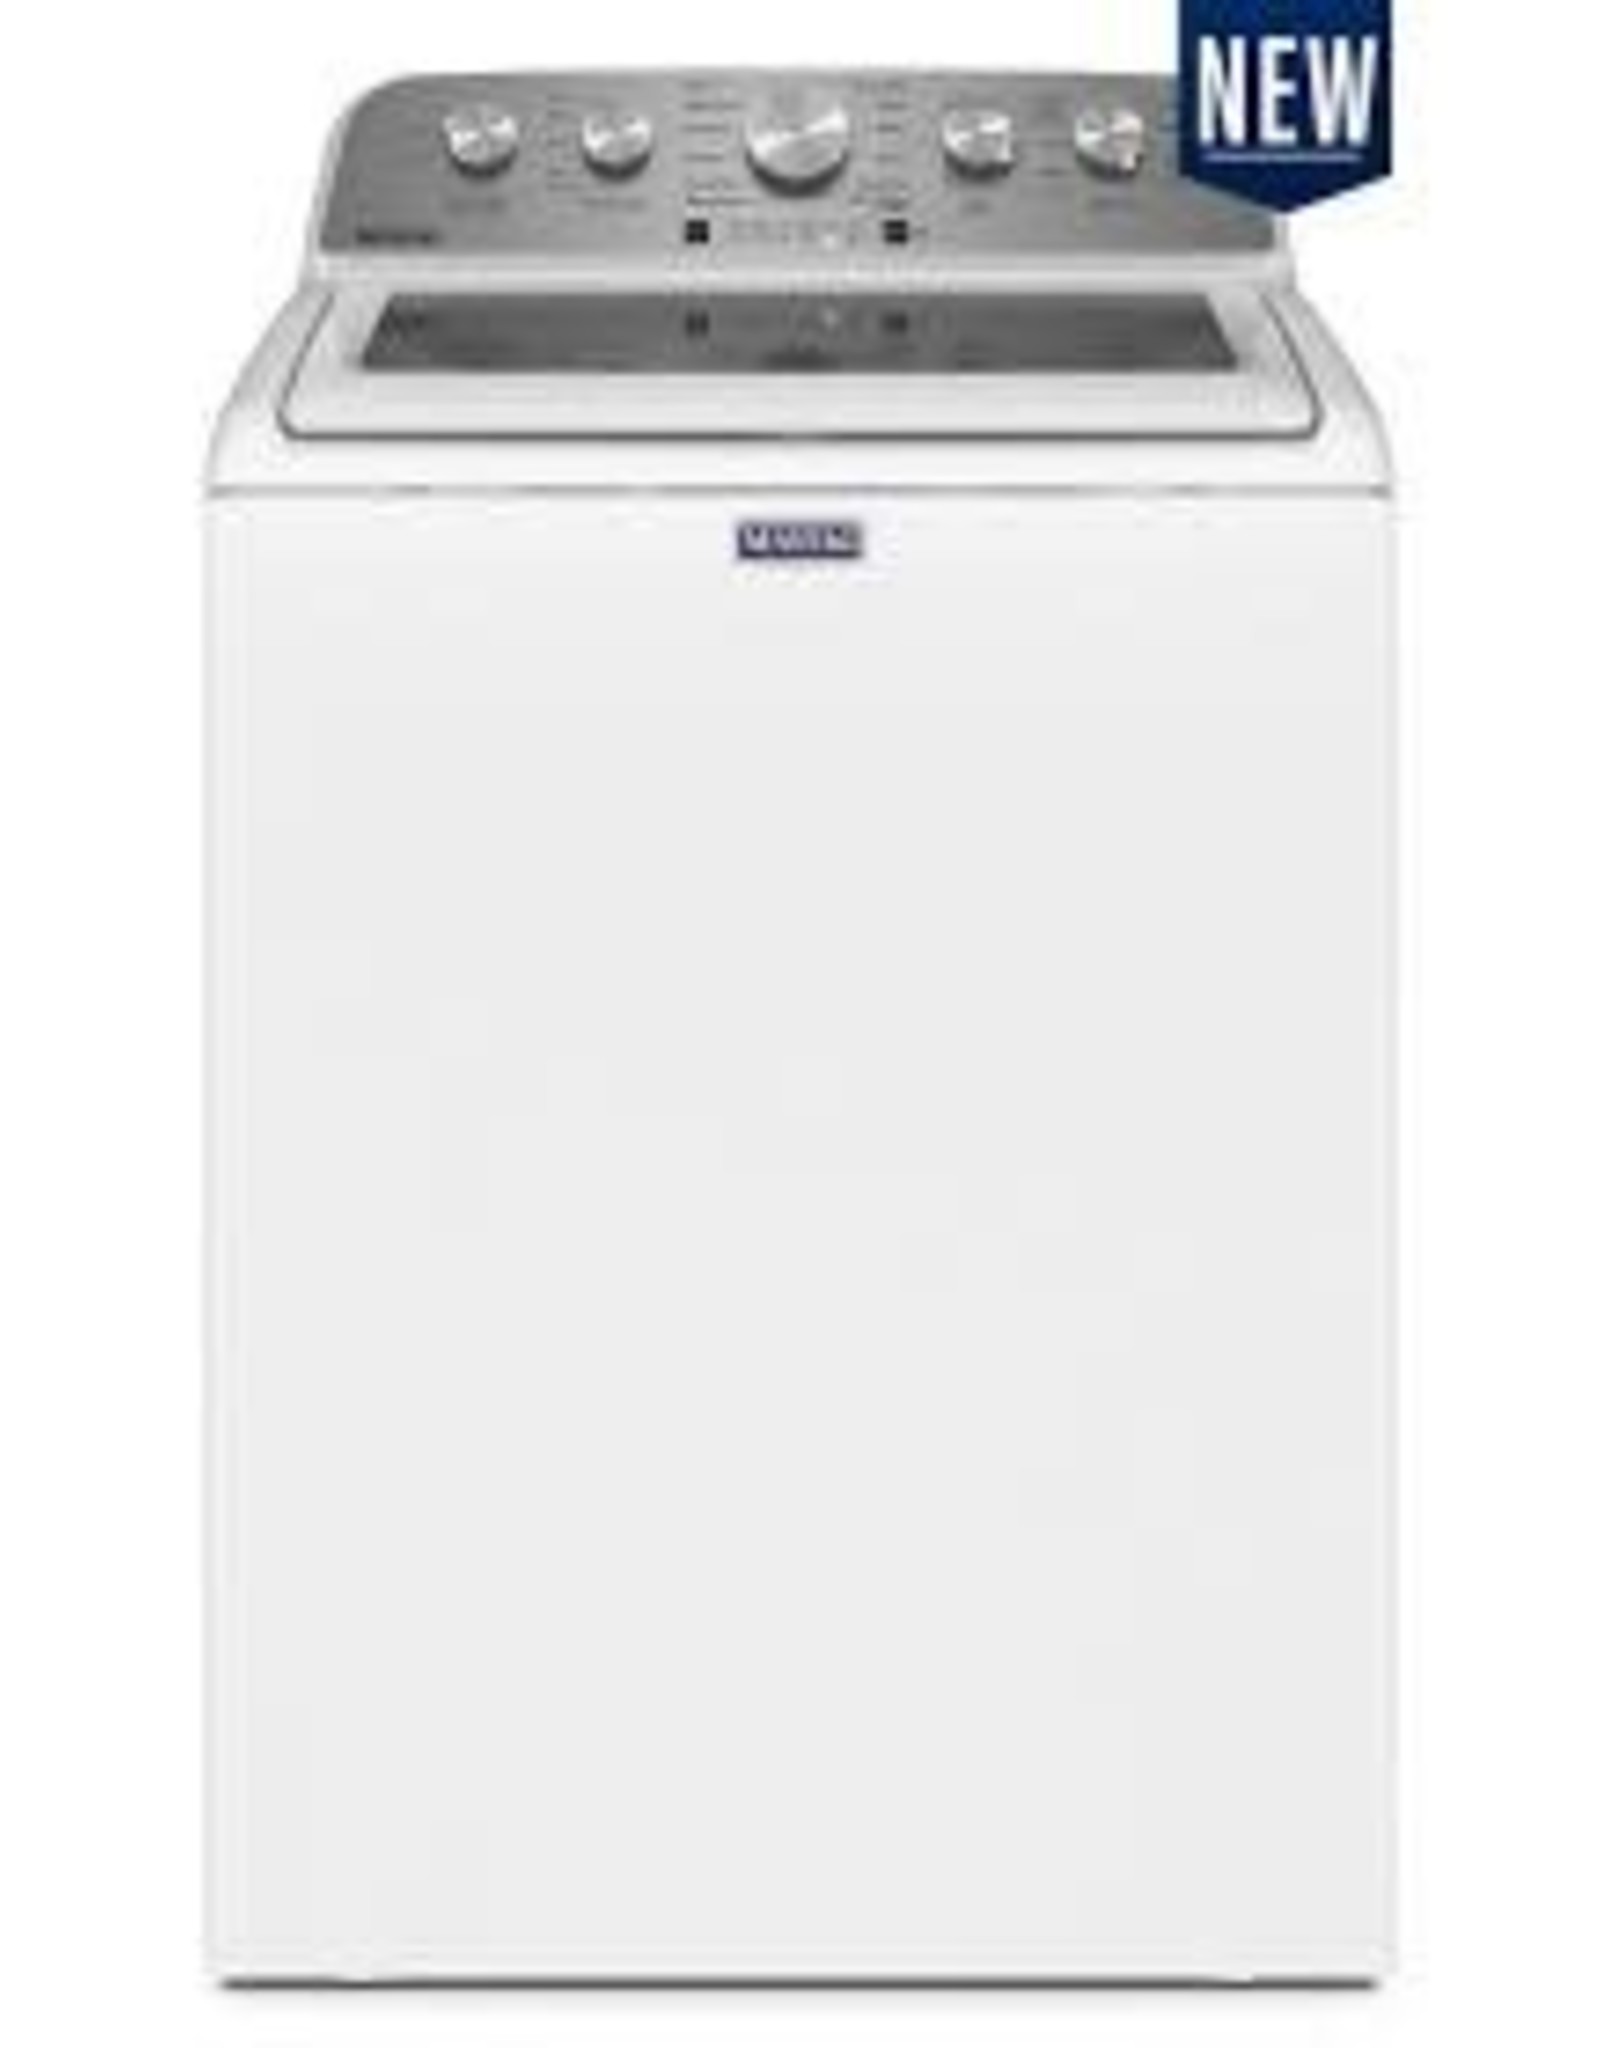 MAYTAG MVW5430MW0 TOP LOAD WASHER WITH EXTRA POWER - 4.8 CU. FT.